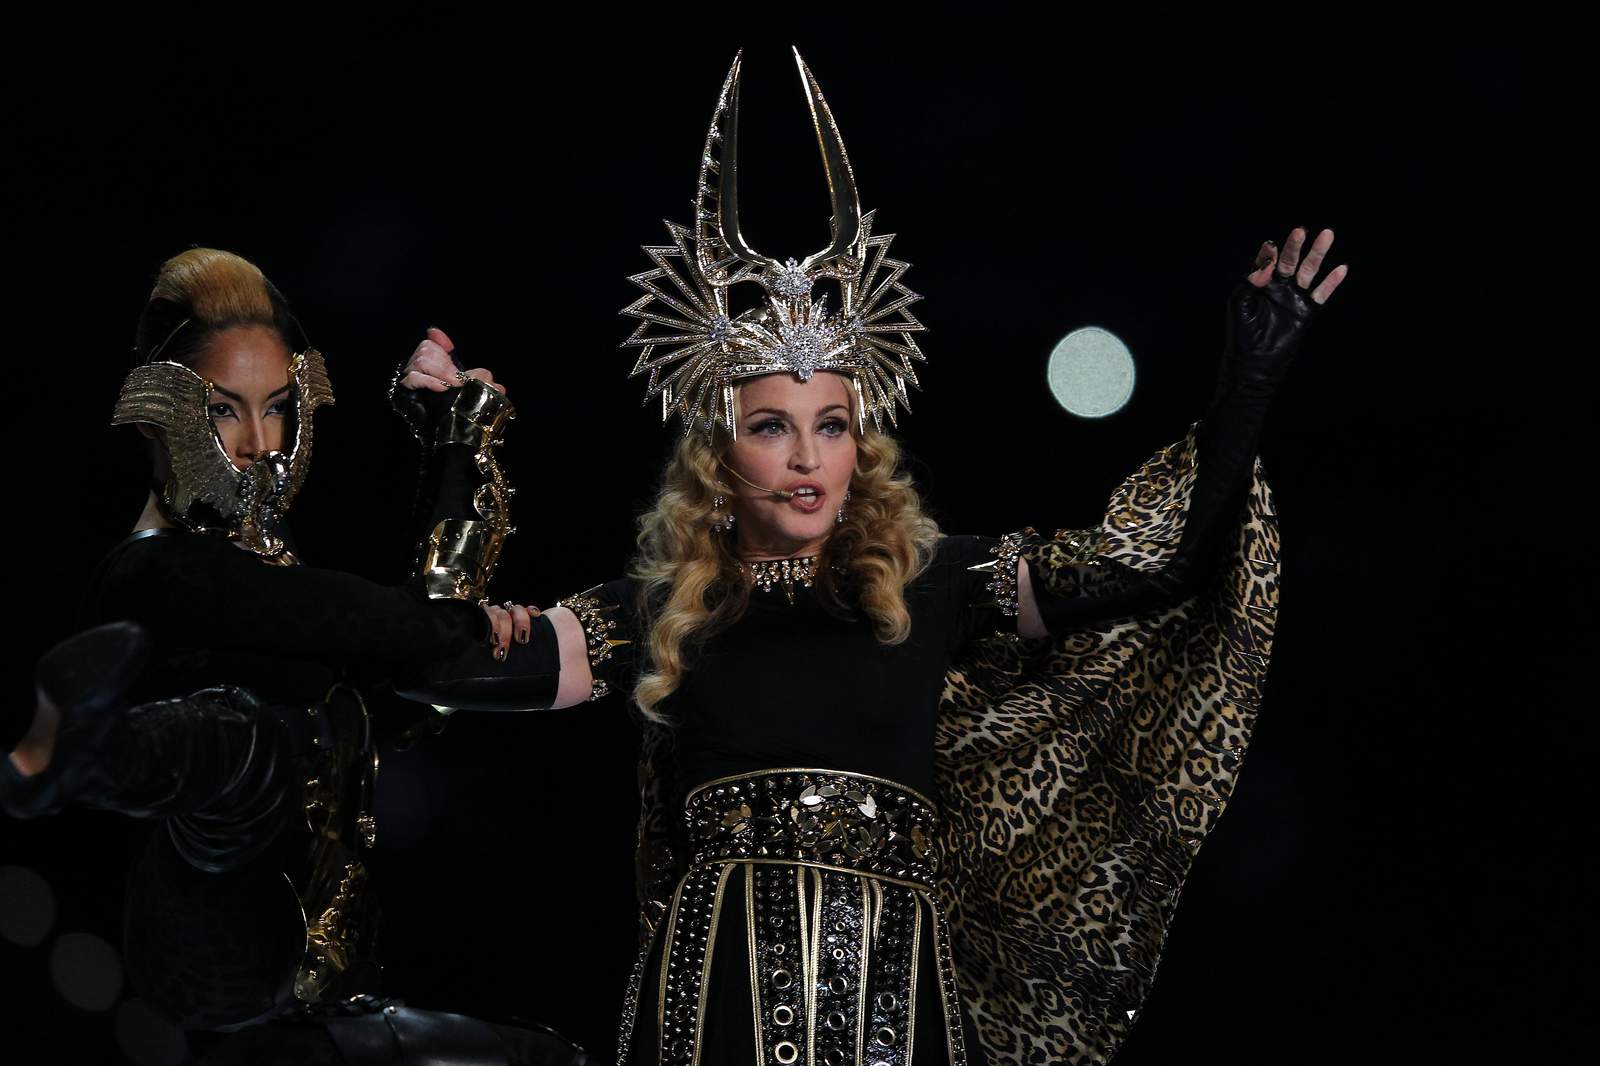 Did Madonna have the best Super Bowl performance of all time? Vote in our bracket